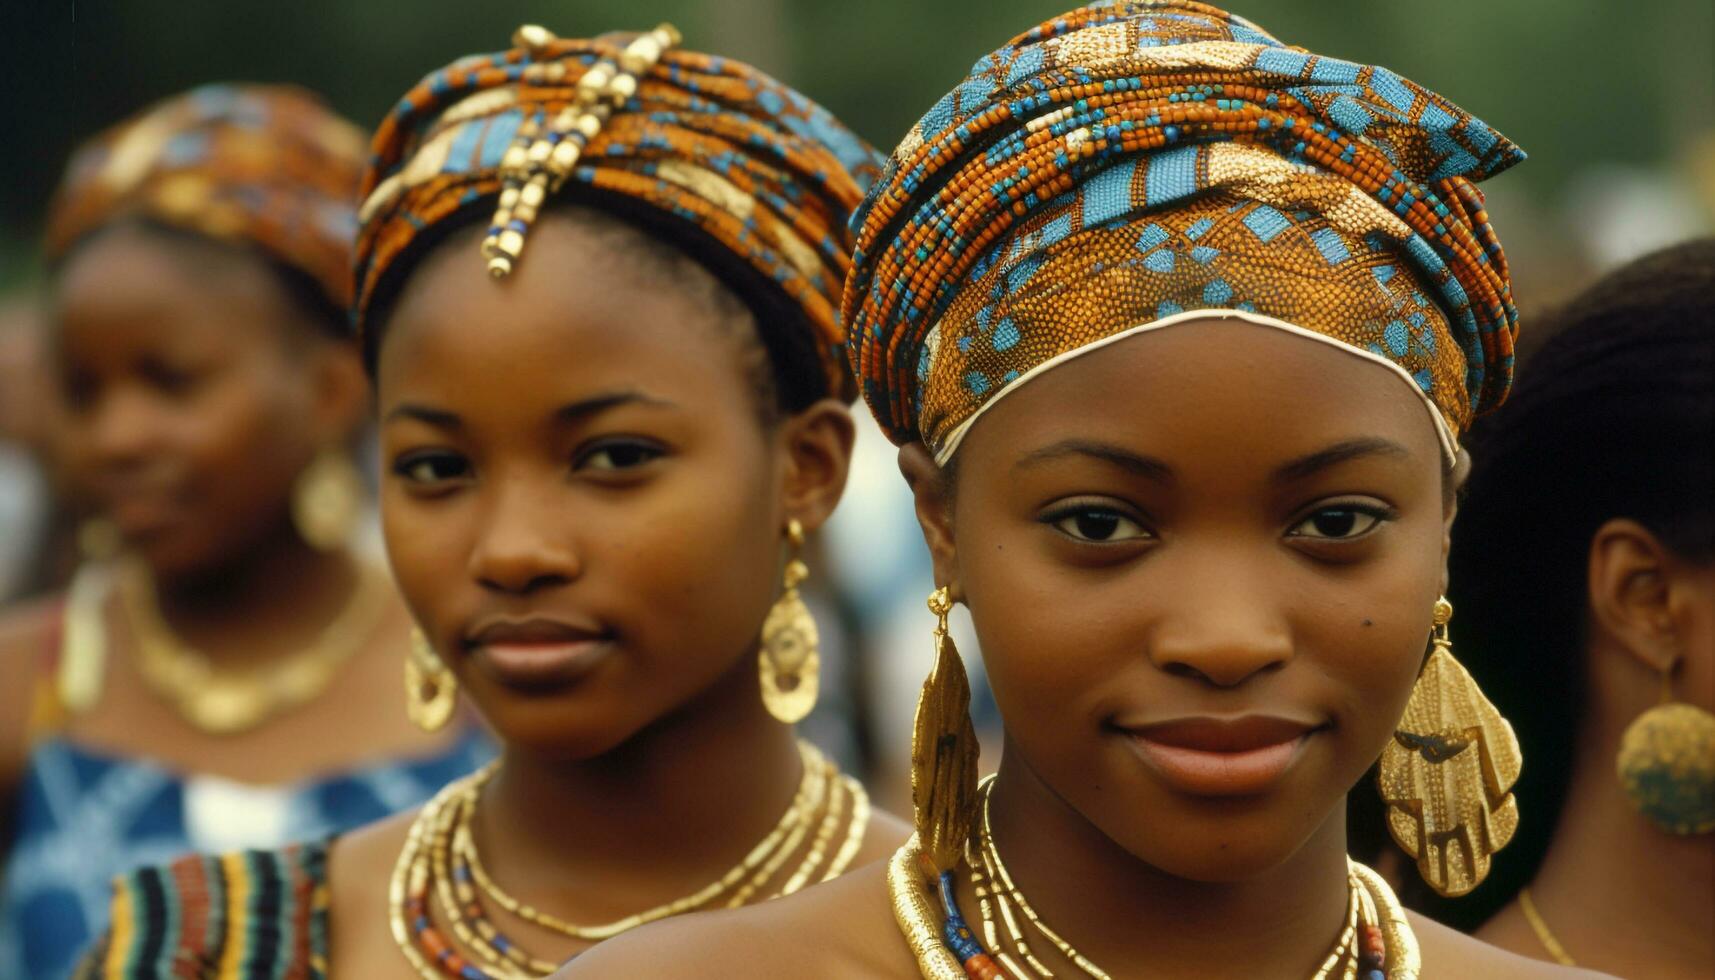 Smiling African women in traditional clothing, looking at camera outdoors generated by AI photo